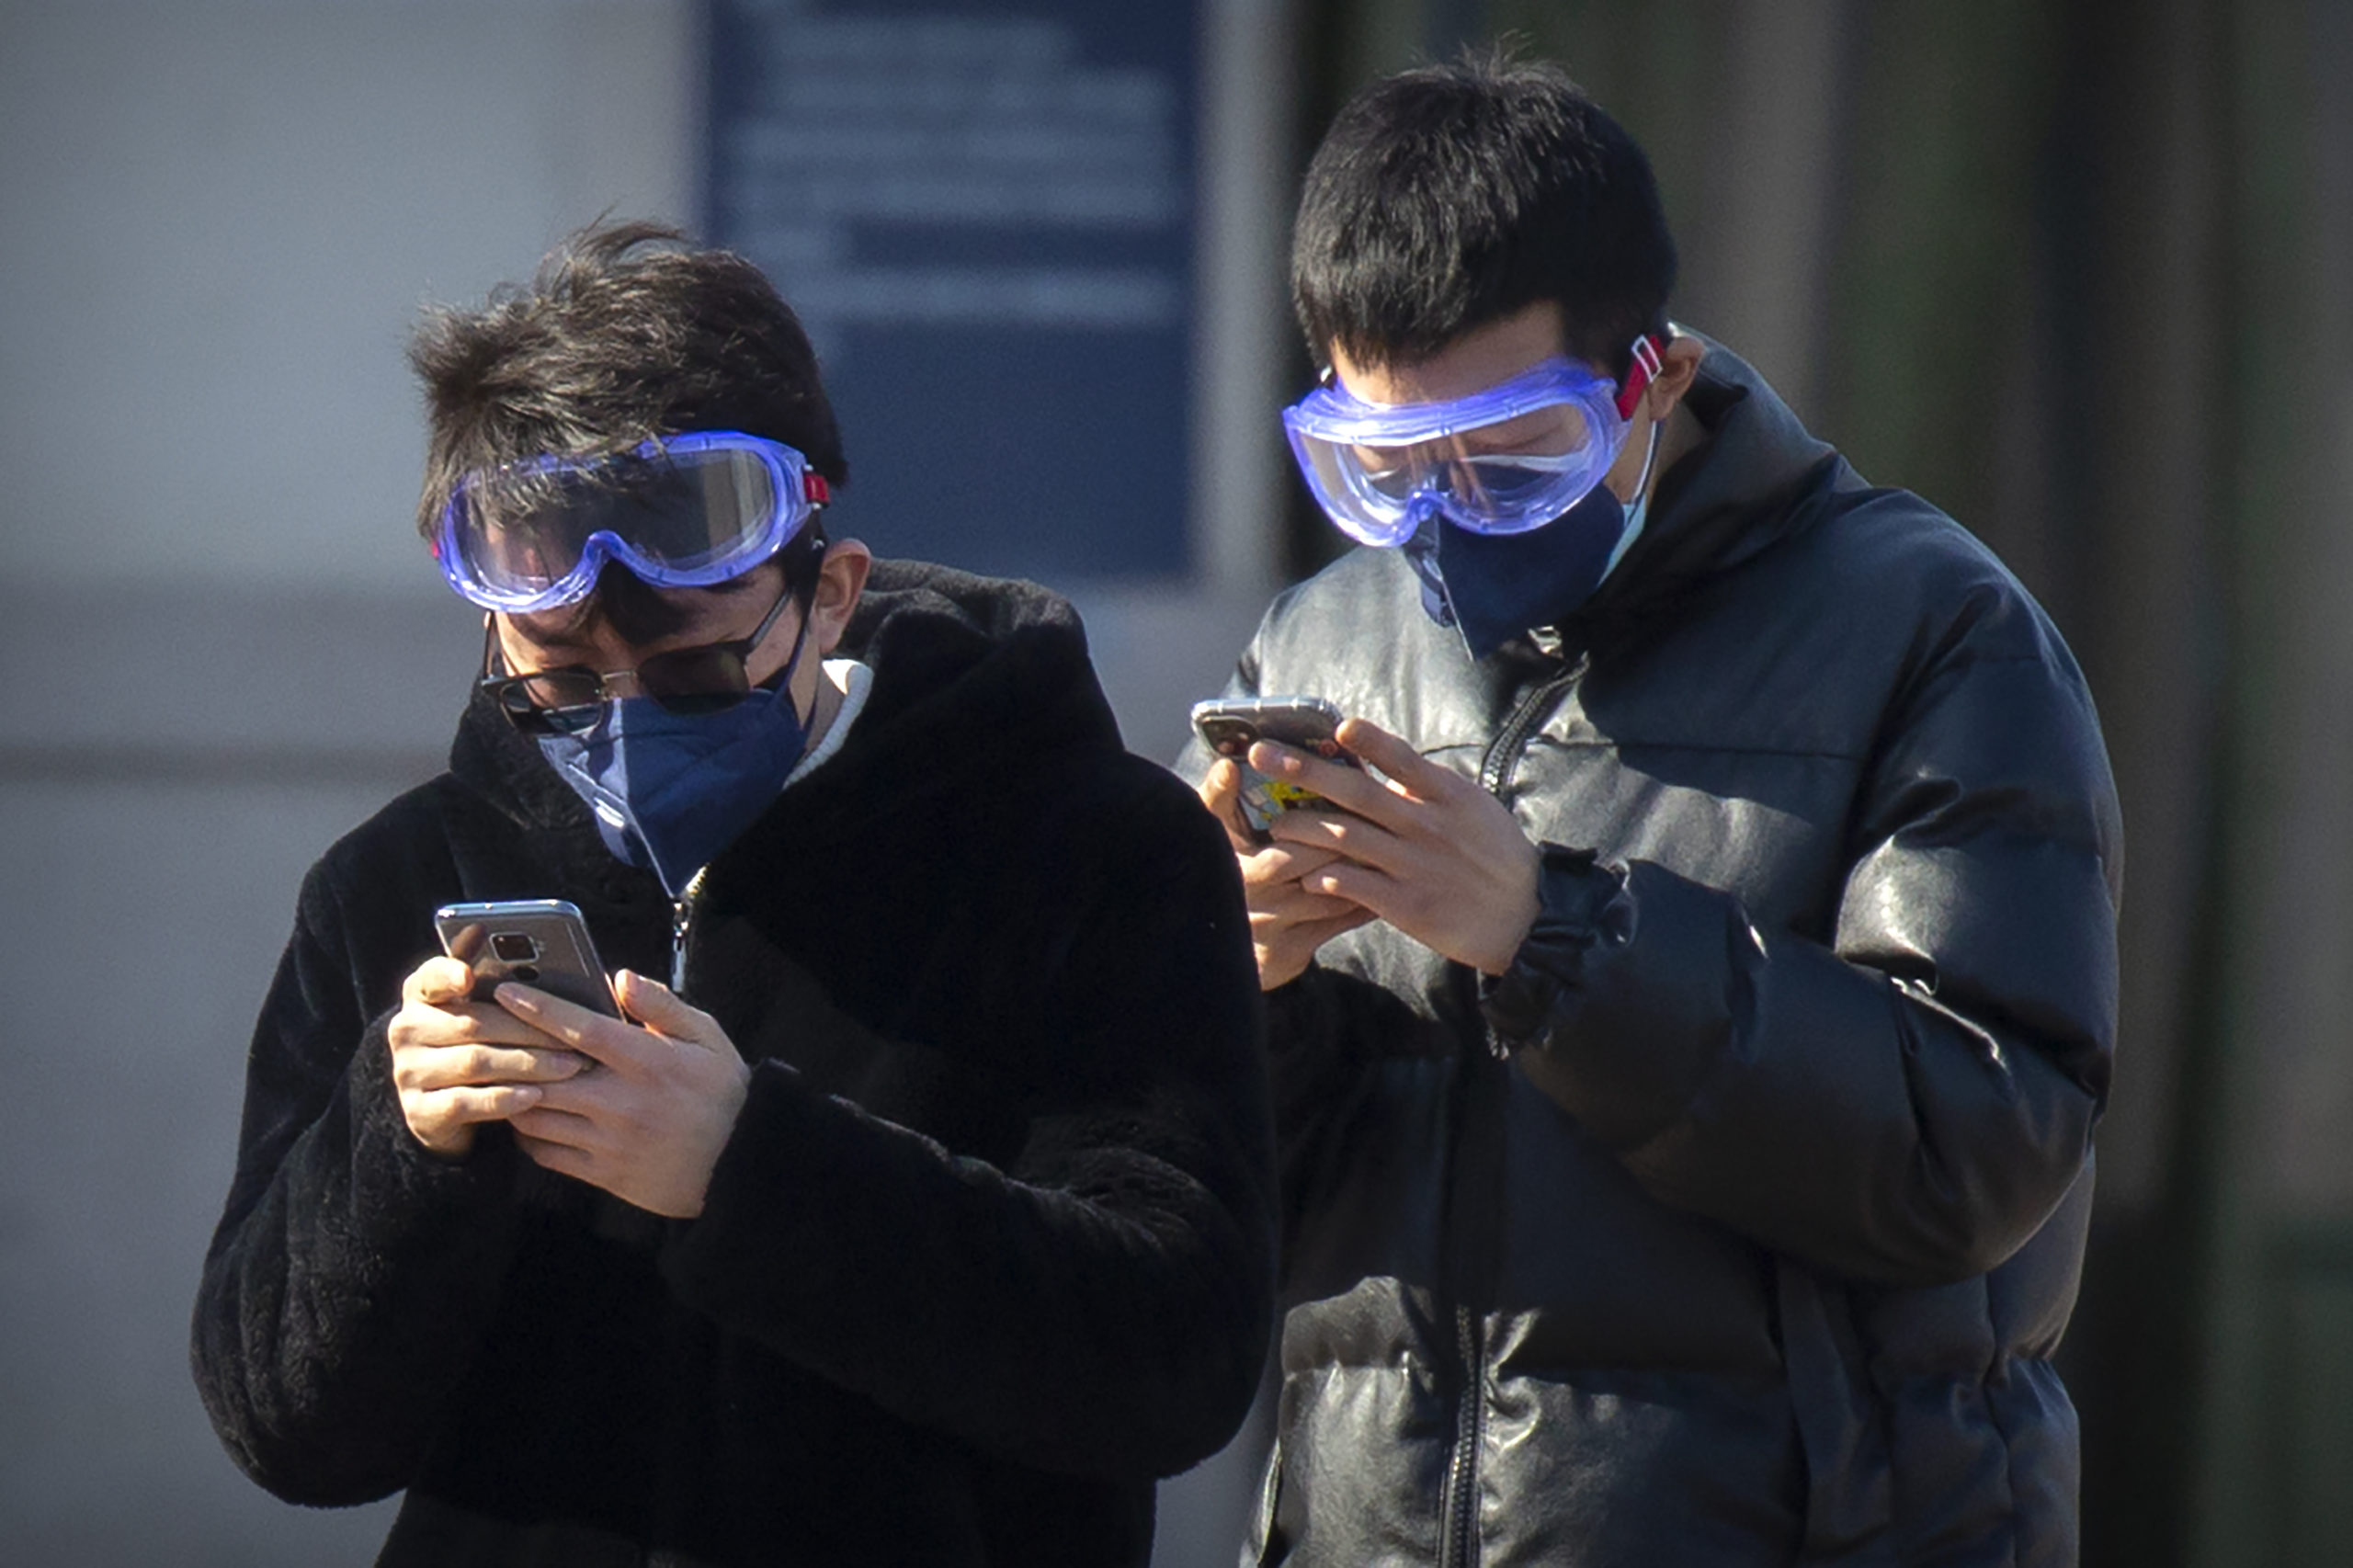 Travelers wear face masks and goggles as they use their smartphones outside the Beijing Railway Station in Beijing, Saturday, Feb. 15, 2020. People returning to Beijing will now have to isolate themselves either at home or in a concentrated area for medical observation, said a notice from the Chinese capital's prevention and control work group published by state media late Friday. (AP Photo/Mark Schiefelbein)